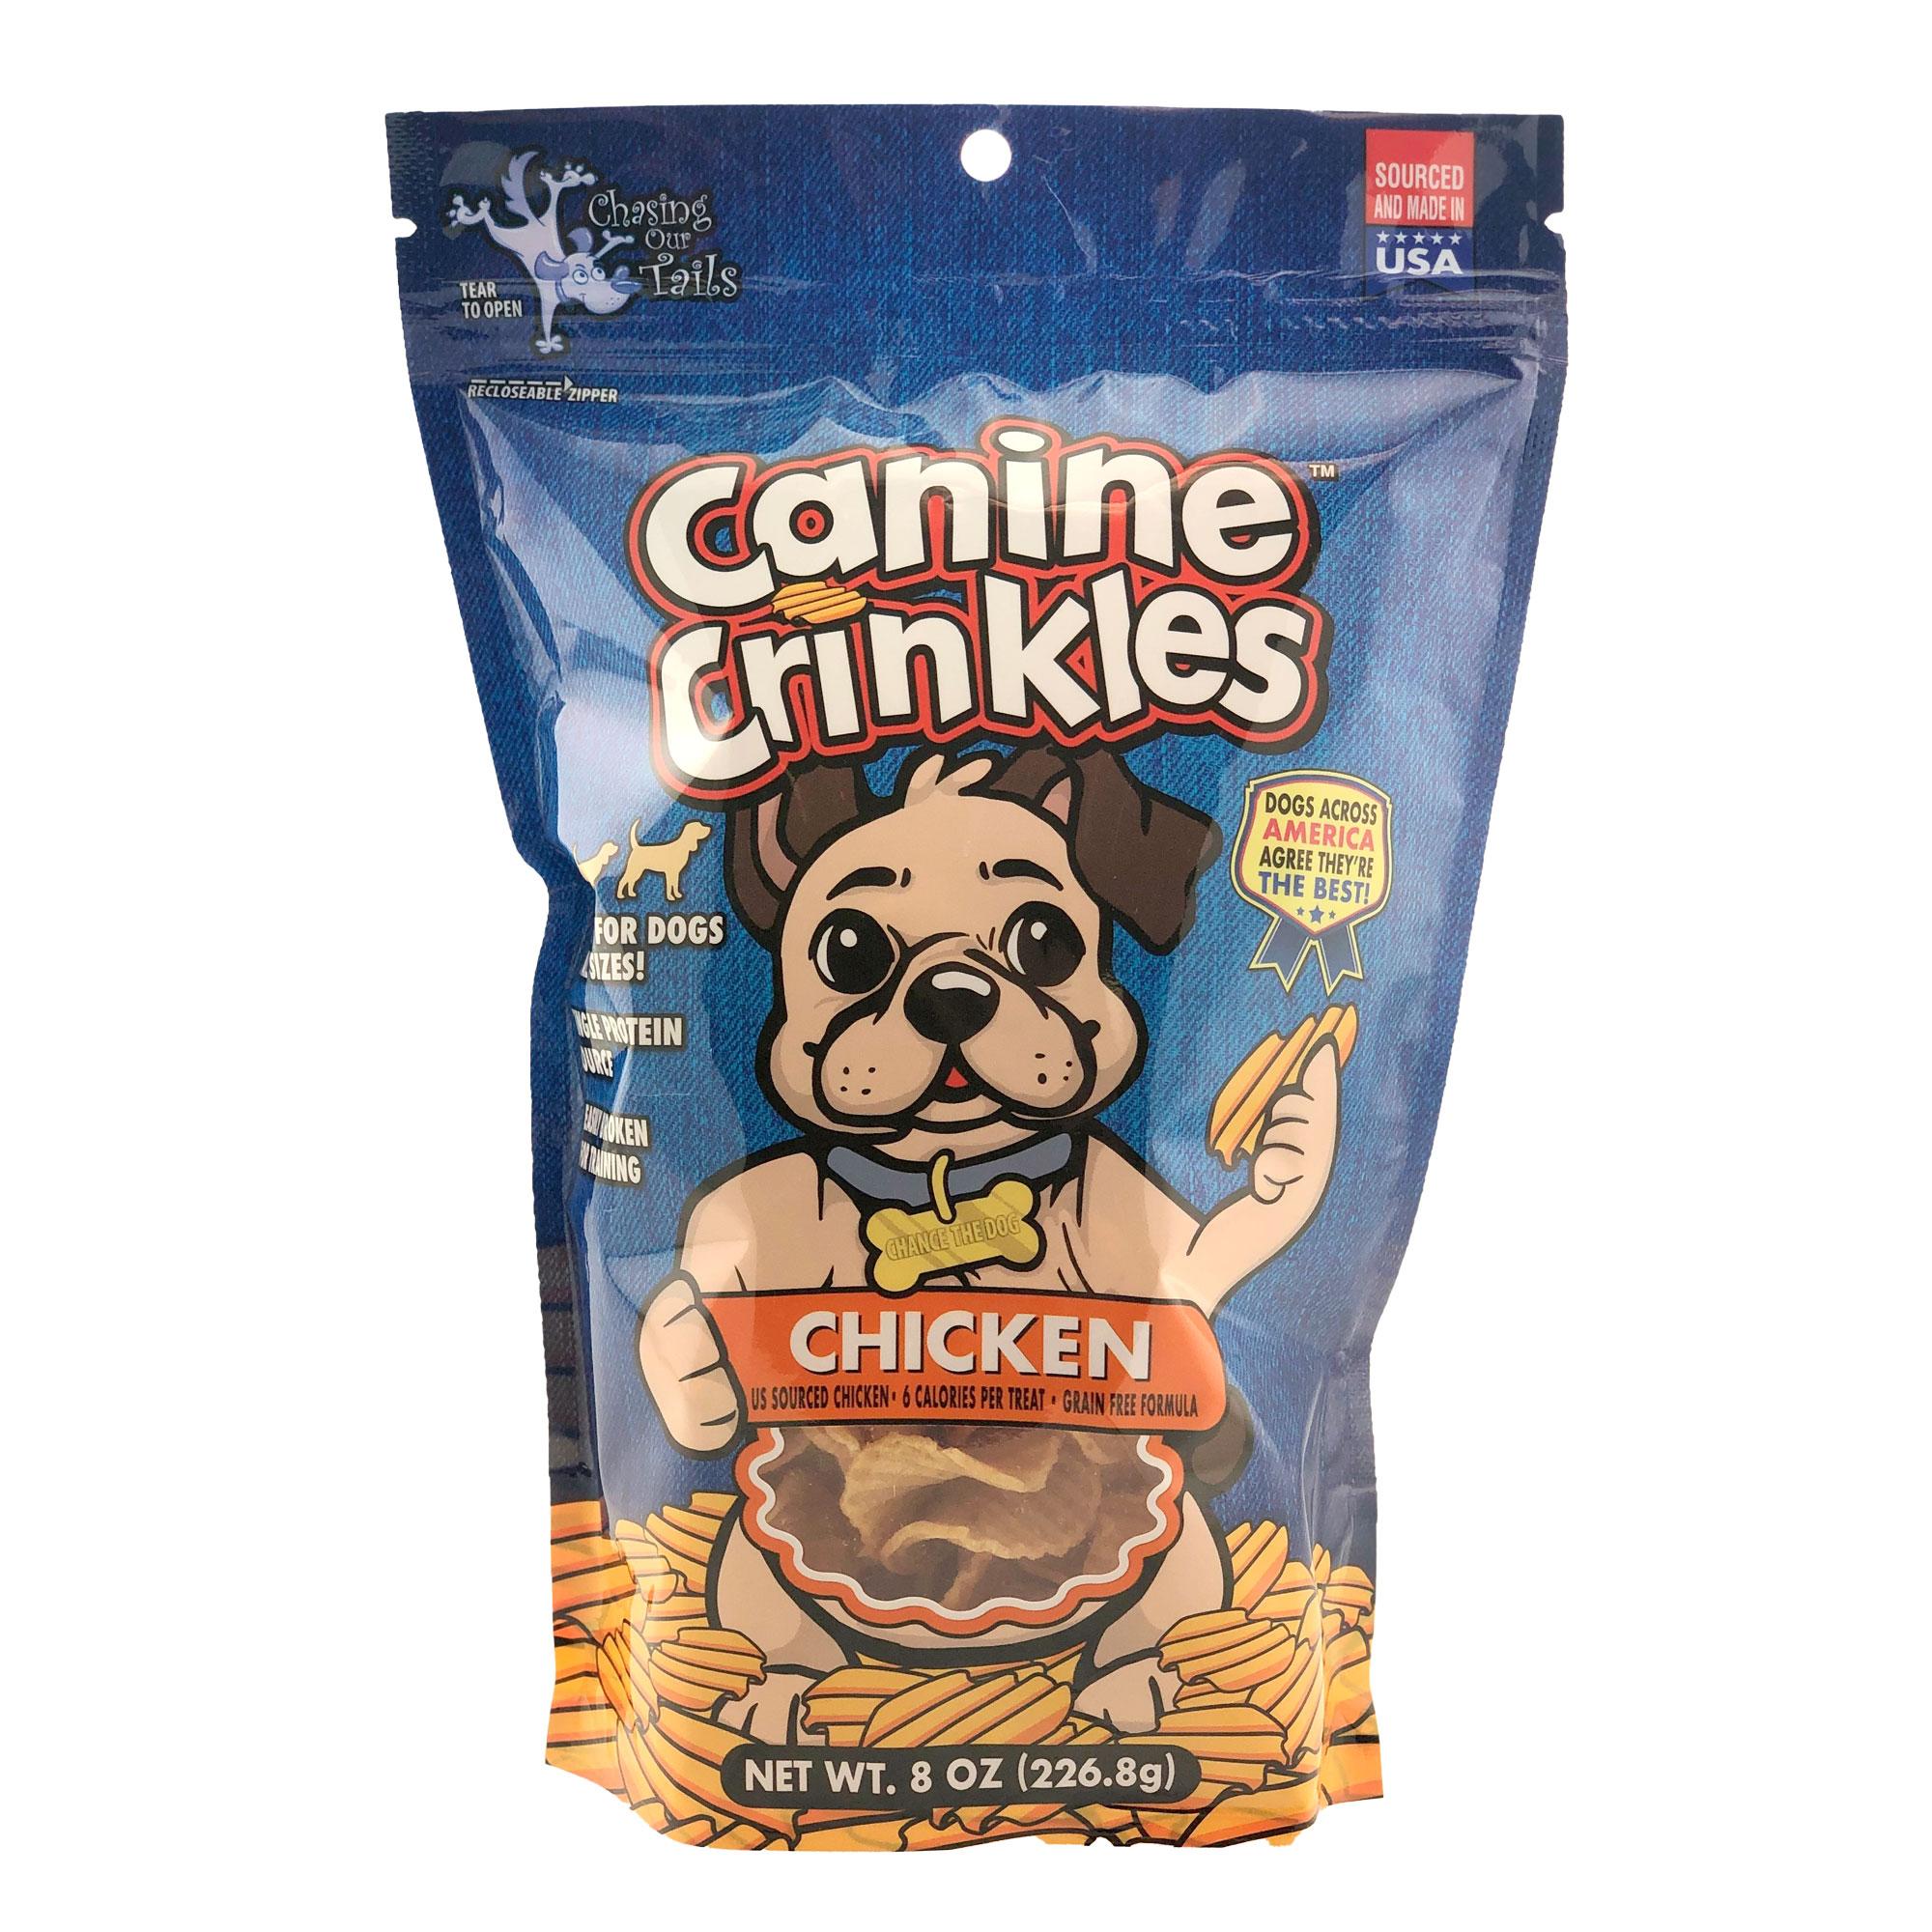 Chasing Our Tails Canine Crinkles Dog Treats - Chicken